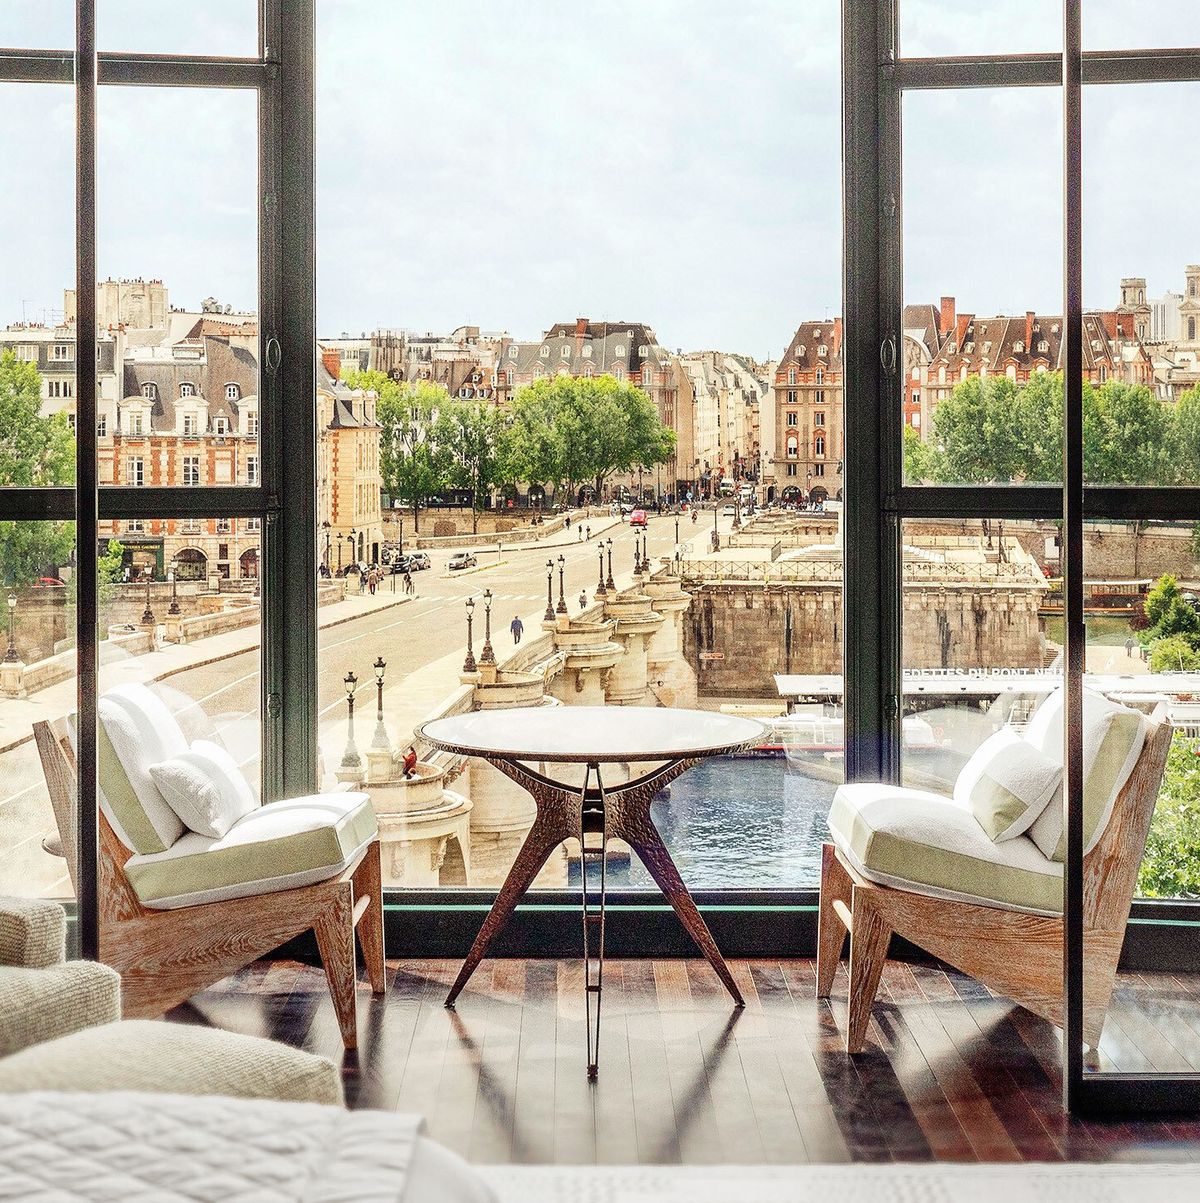 Cheval Blanc Paris to open on September 7, 2021 – Business Traveller